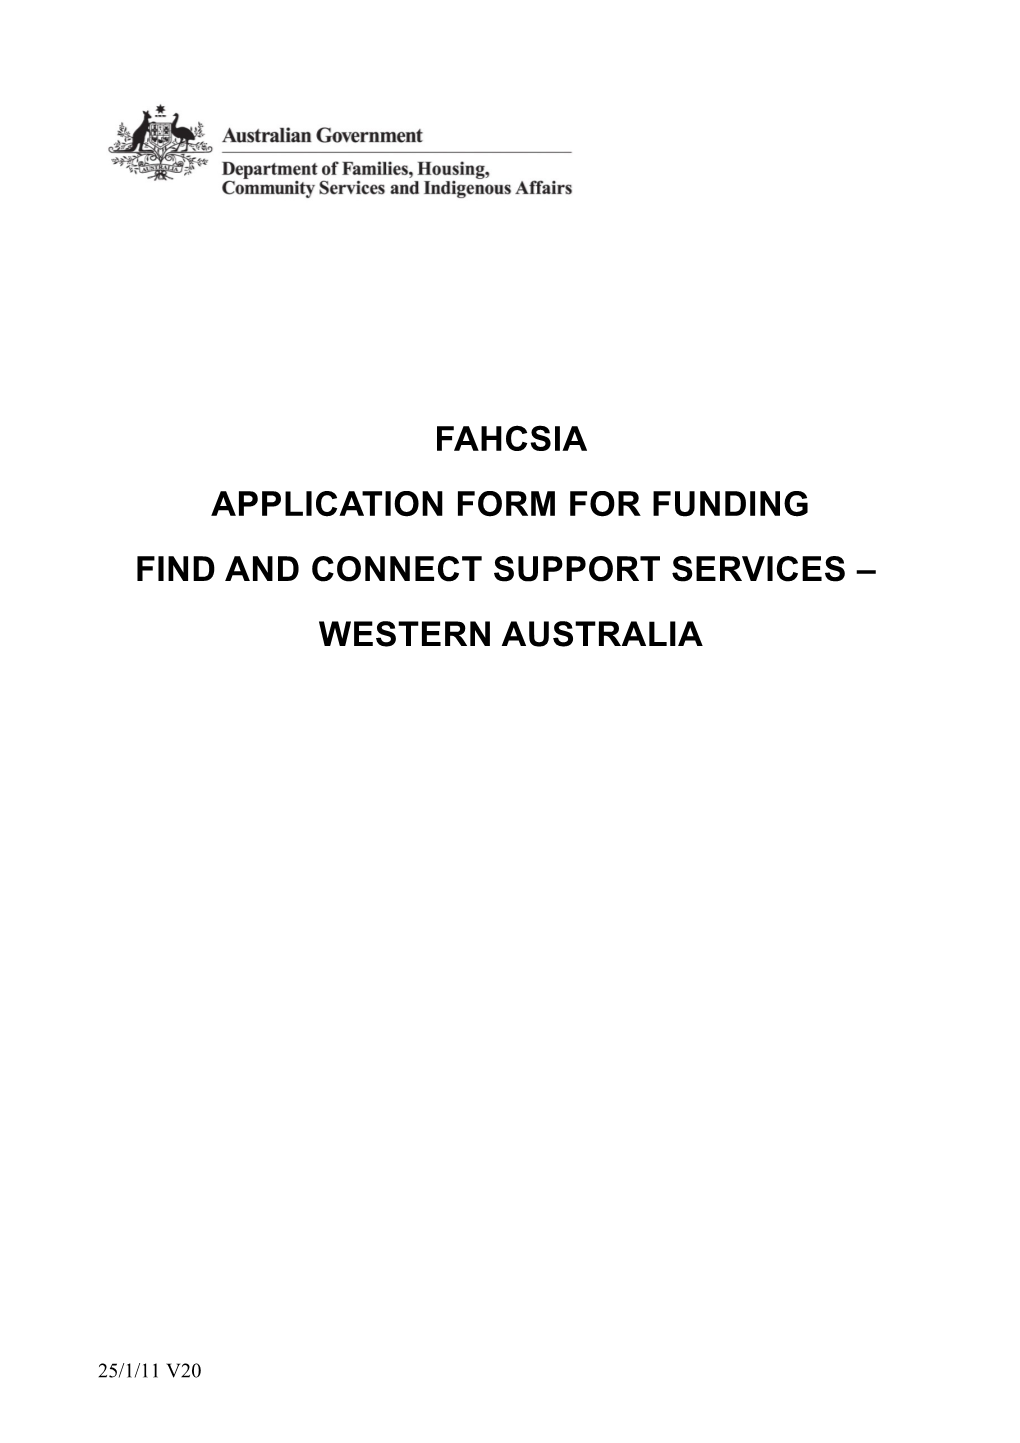 Standard Application Form for Funding